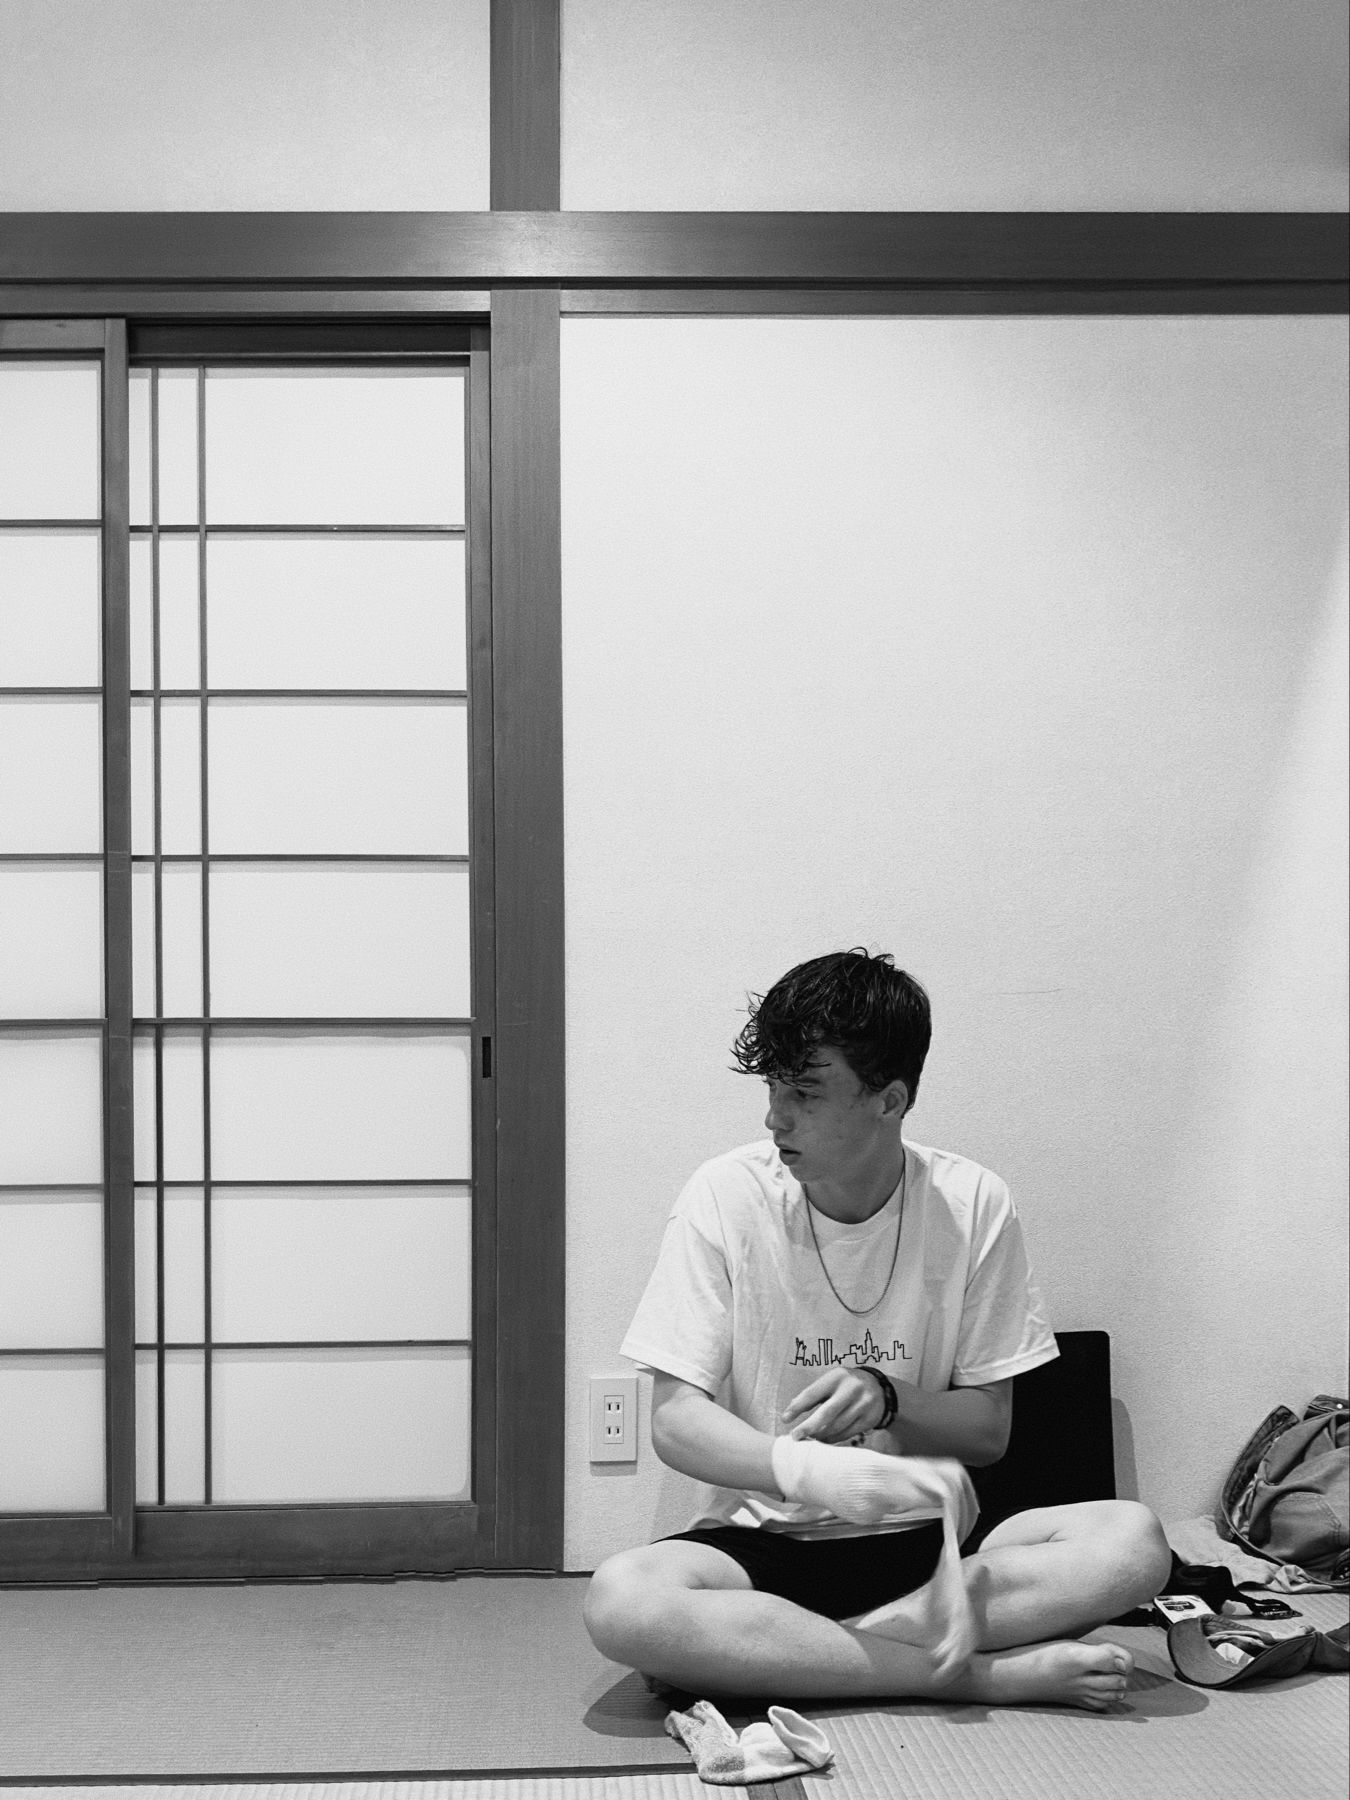 A person sits cross-legged on a tatami floor in a traditional Japanese room with shoji sliding doors. The individual appears pensive and is dressed in casual, modern clothing, contrasting with the room&rsquo;s cultural aesthetic. Black and white photo.